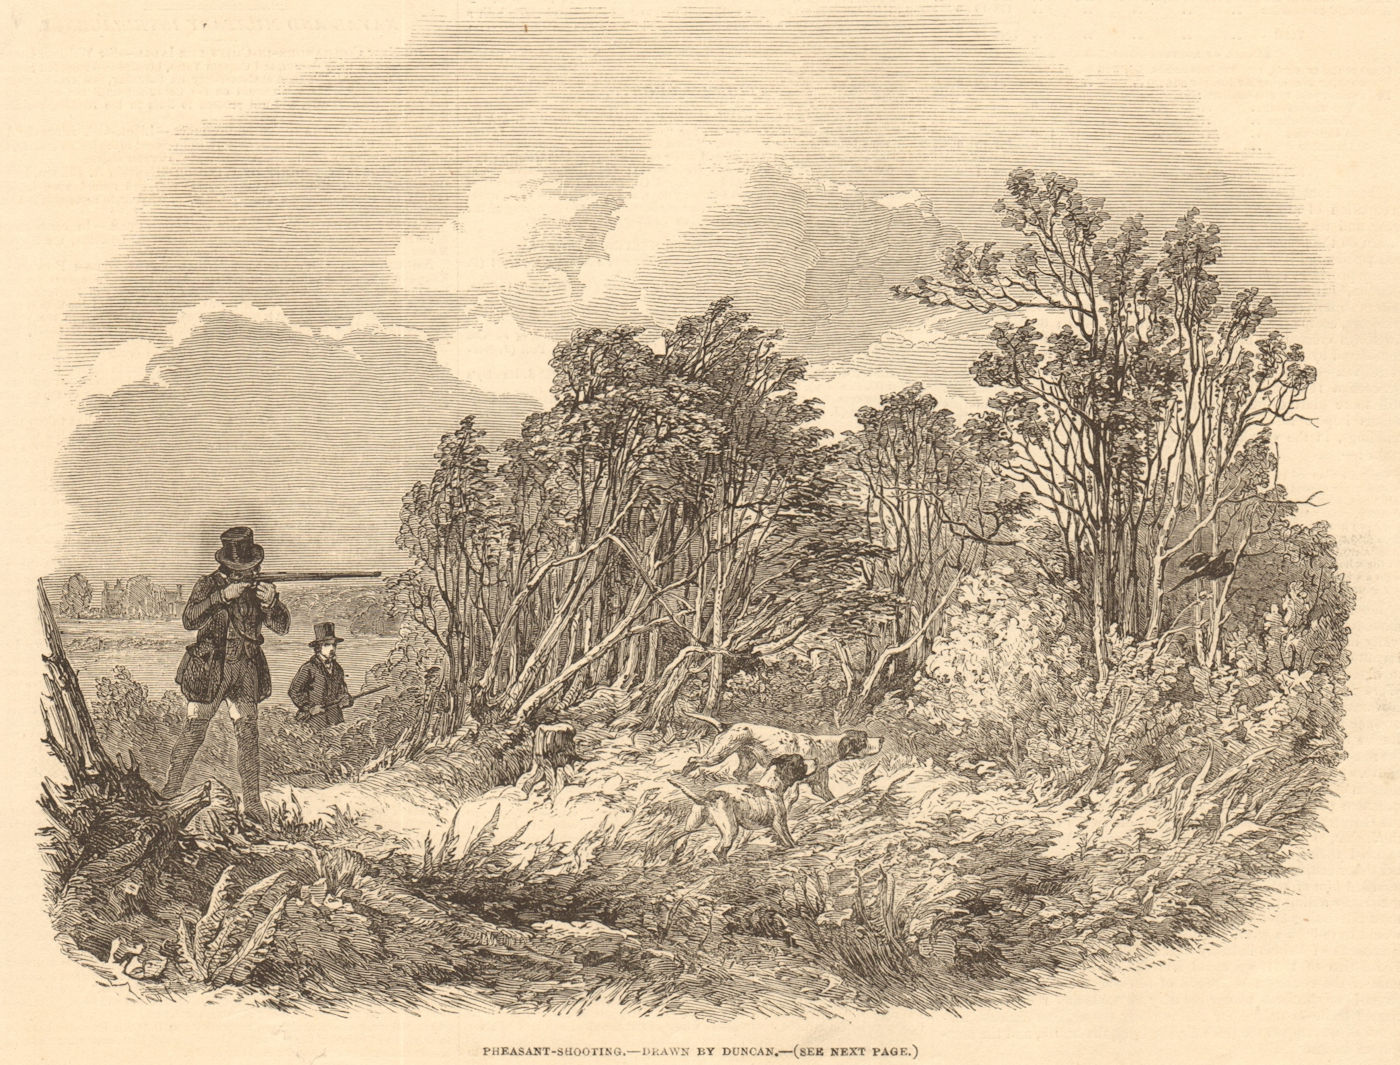 Pheasant-shooting - drawn by Duncan. England. Hunting 1850 old antique print